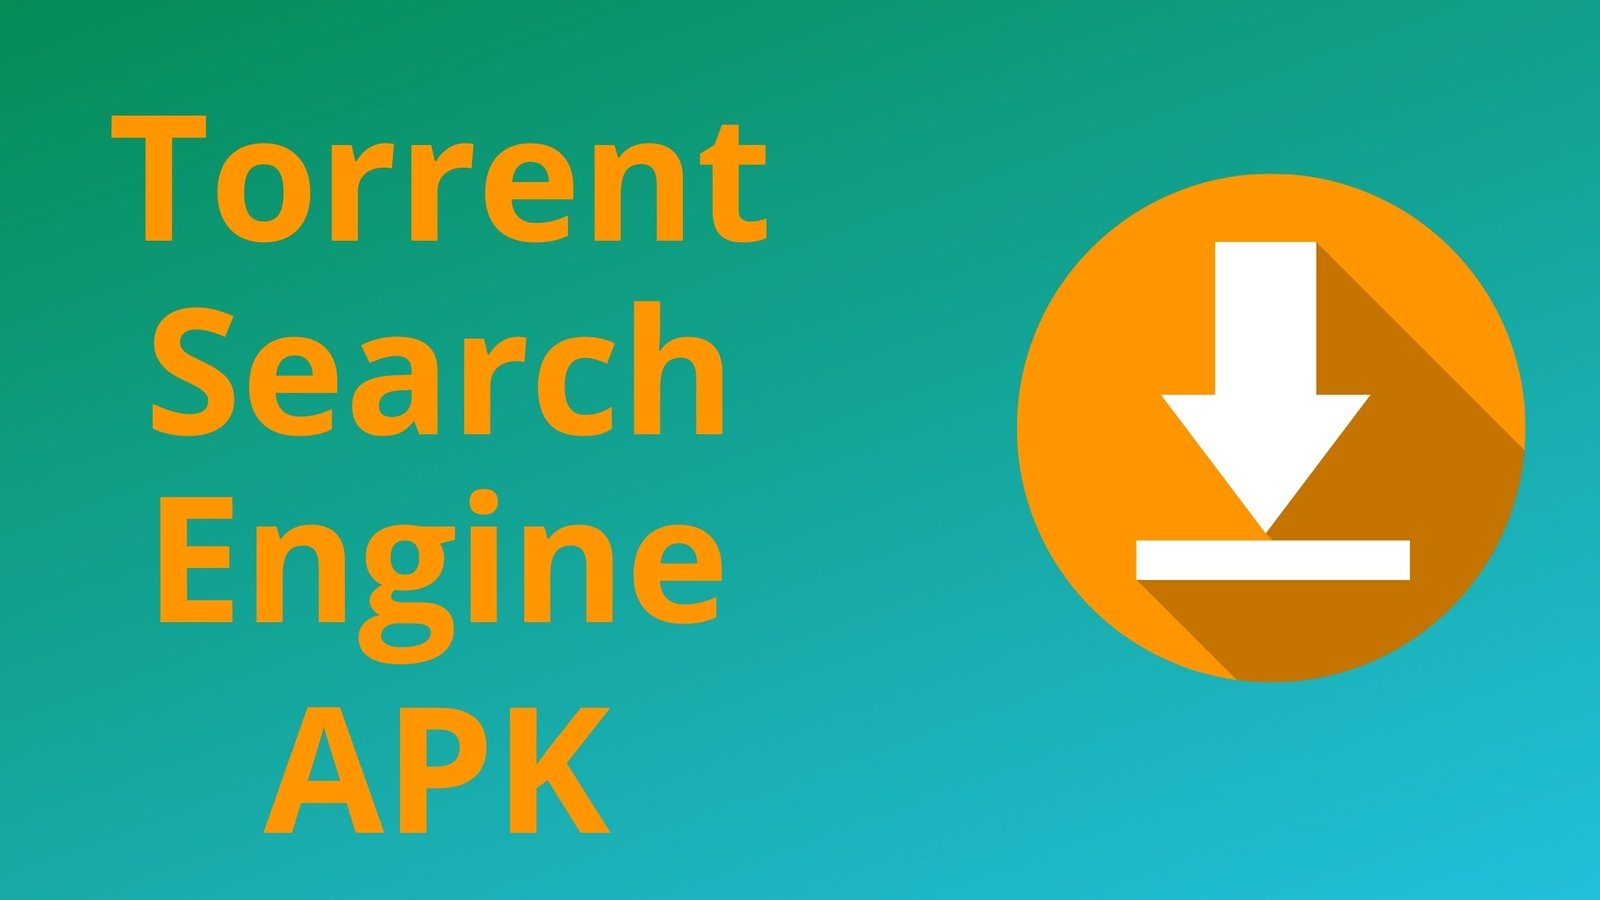 Torrent Search Engine apk for PC